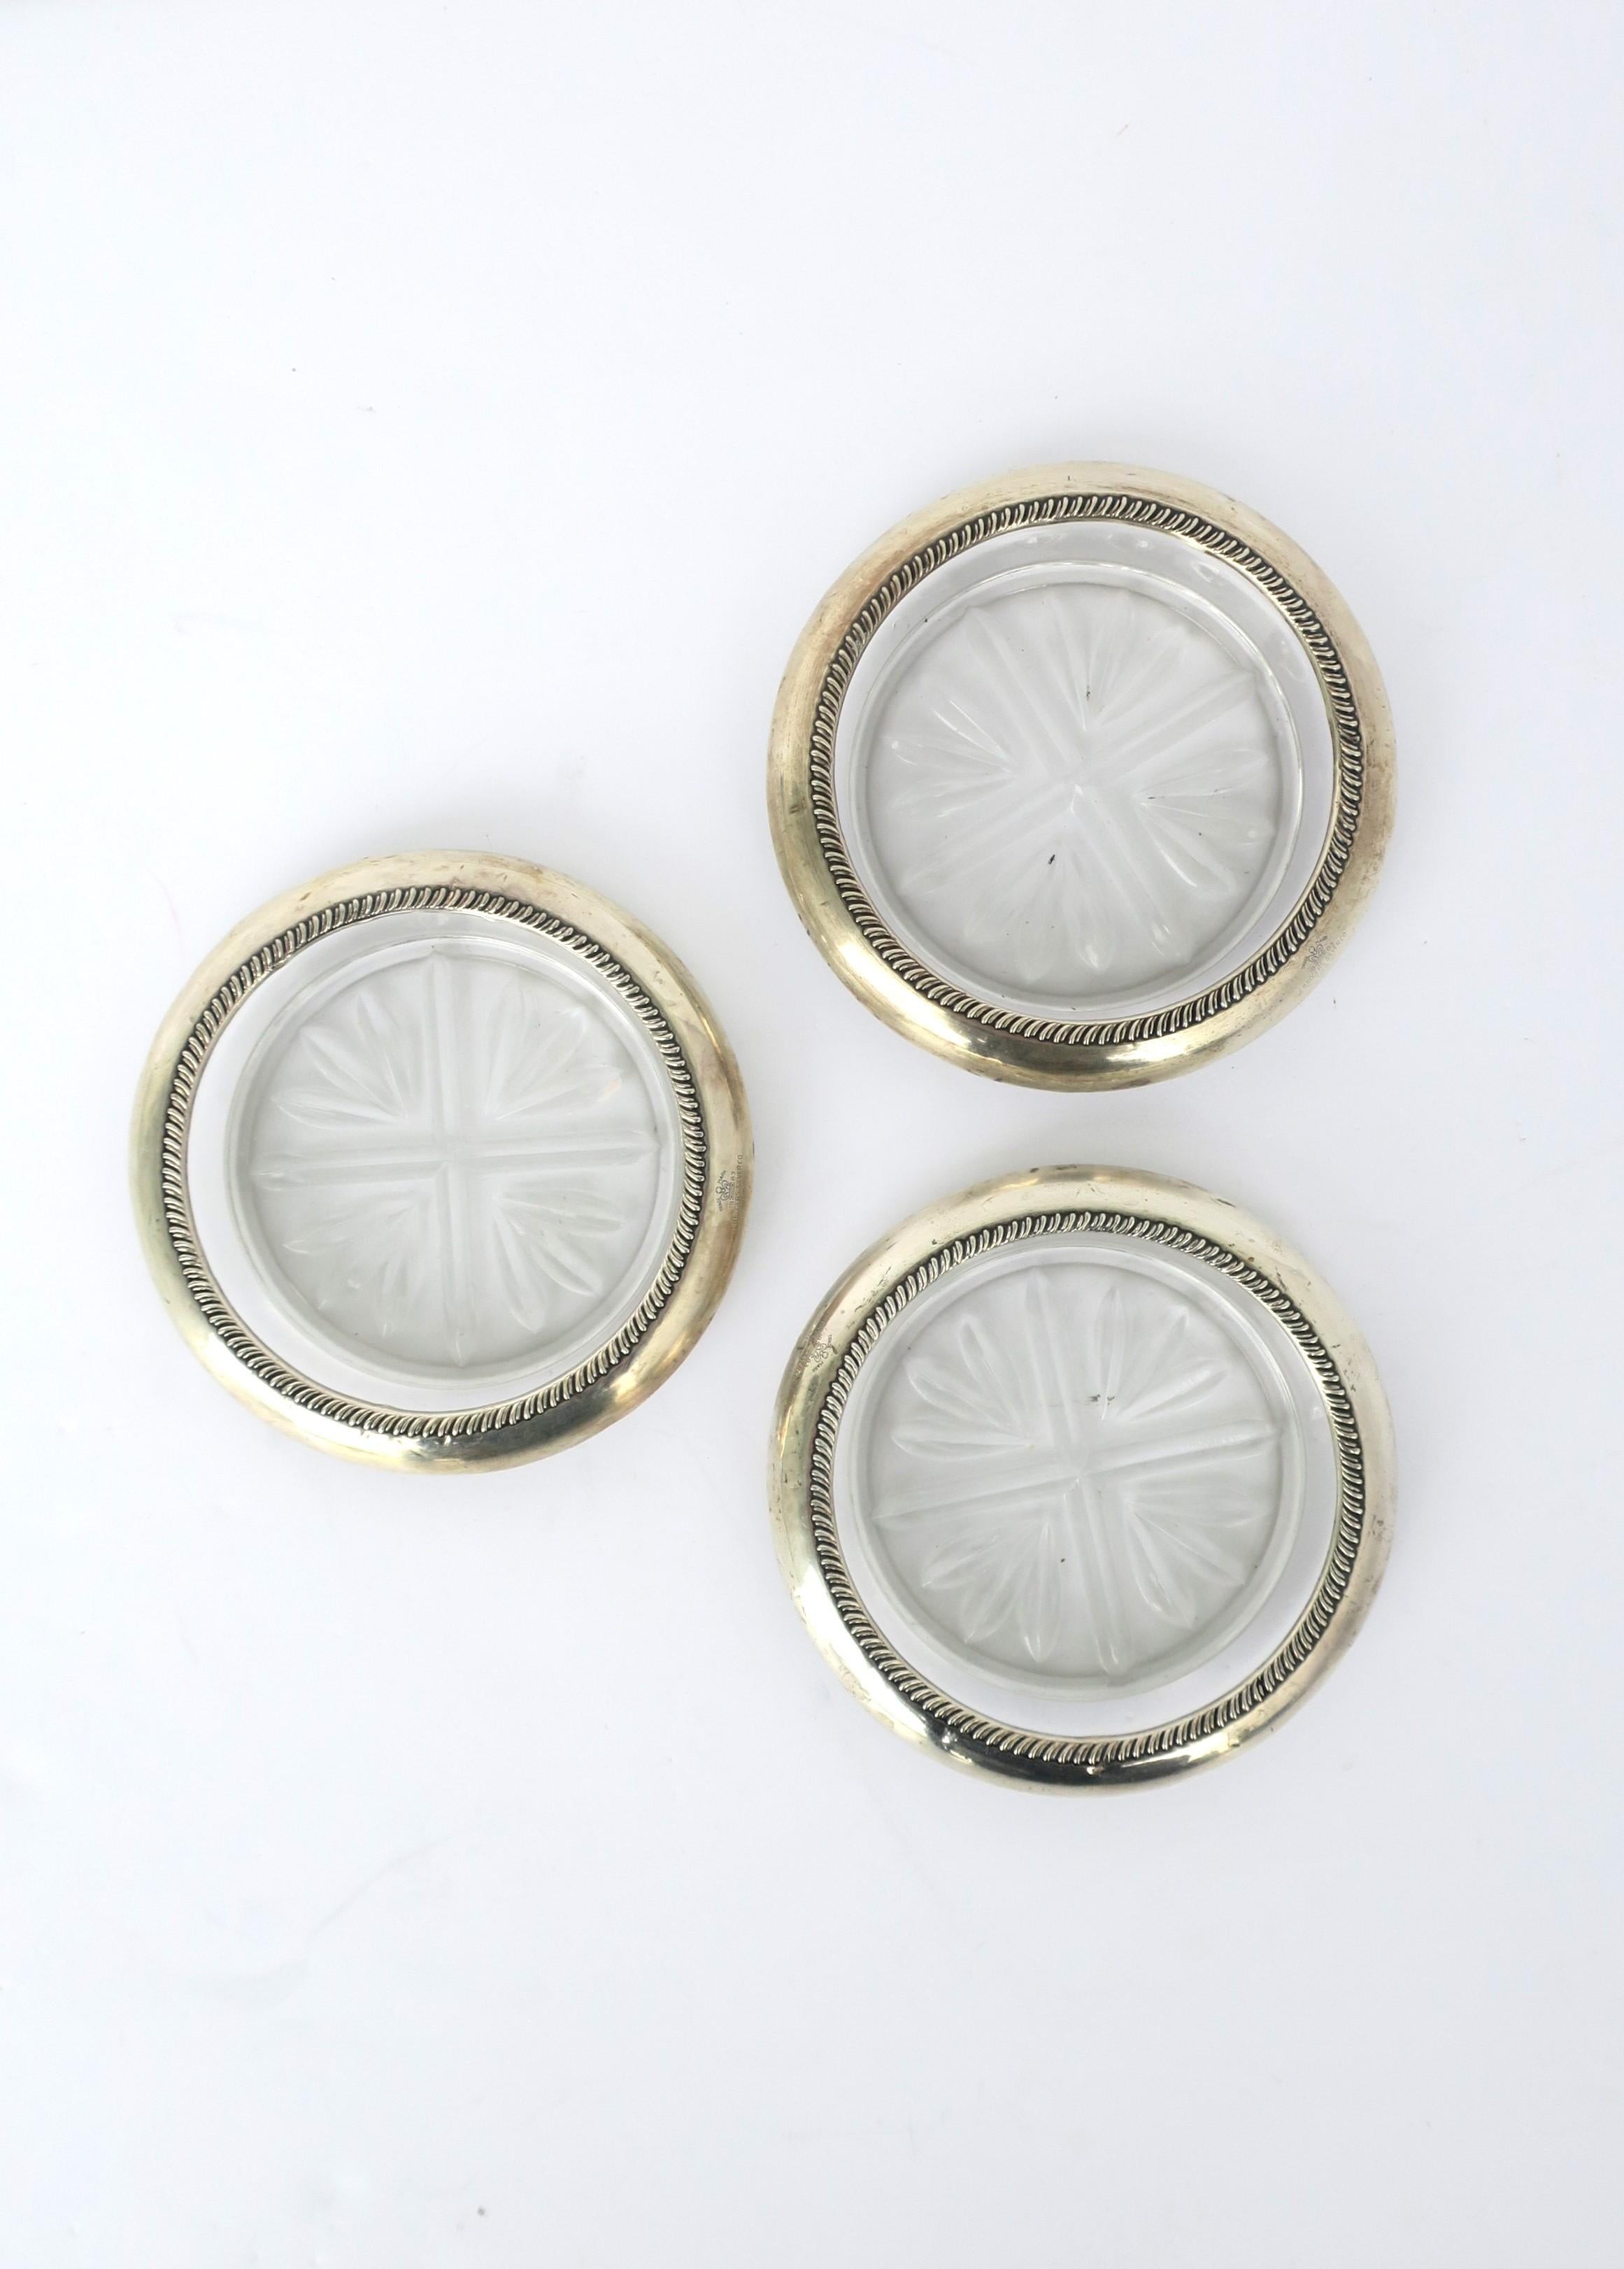 A set of three (3) sterling silver and cut-glass coaster set, circa early to mid-20th century, USA. Three coasters with sterling silver overlay and cut-glass design on bottom. Essential for protecting furniture tops. Each marked 'FB Rogers Silver